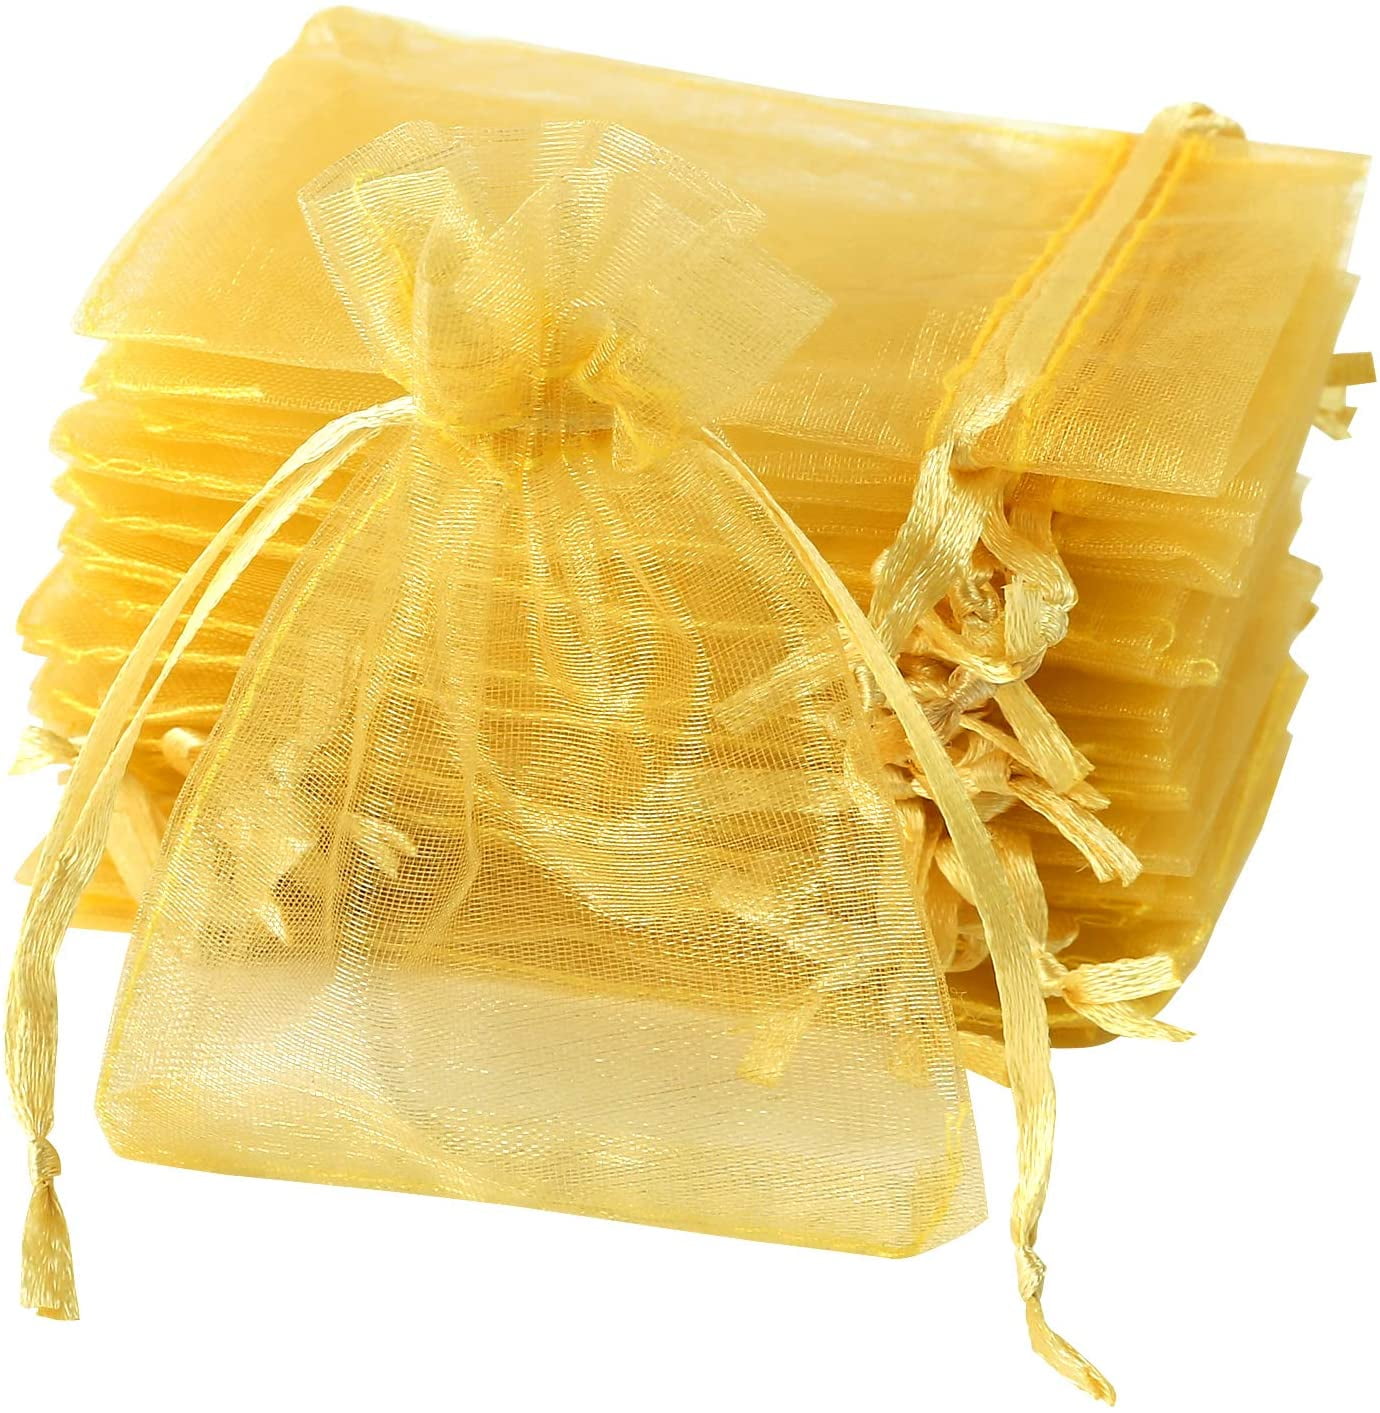 120 sytles ORGANZA GIFT BAG Candy Sheer Jewellery Pouch Wedding Birthday Party 